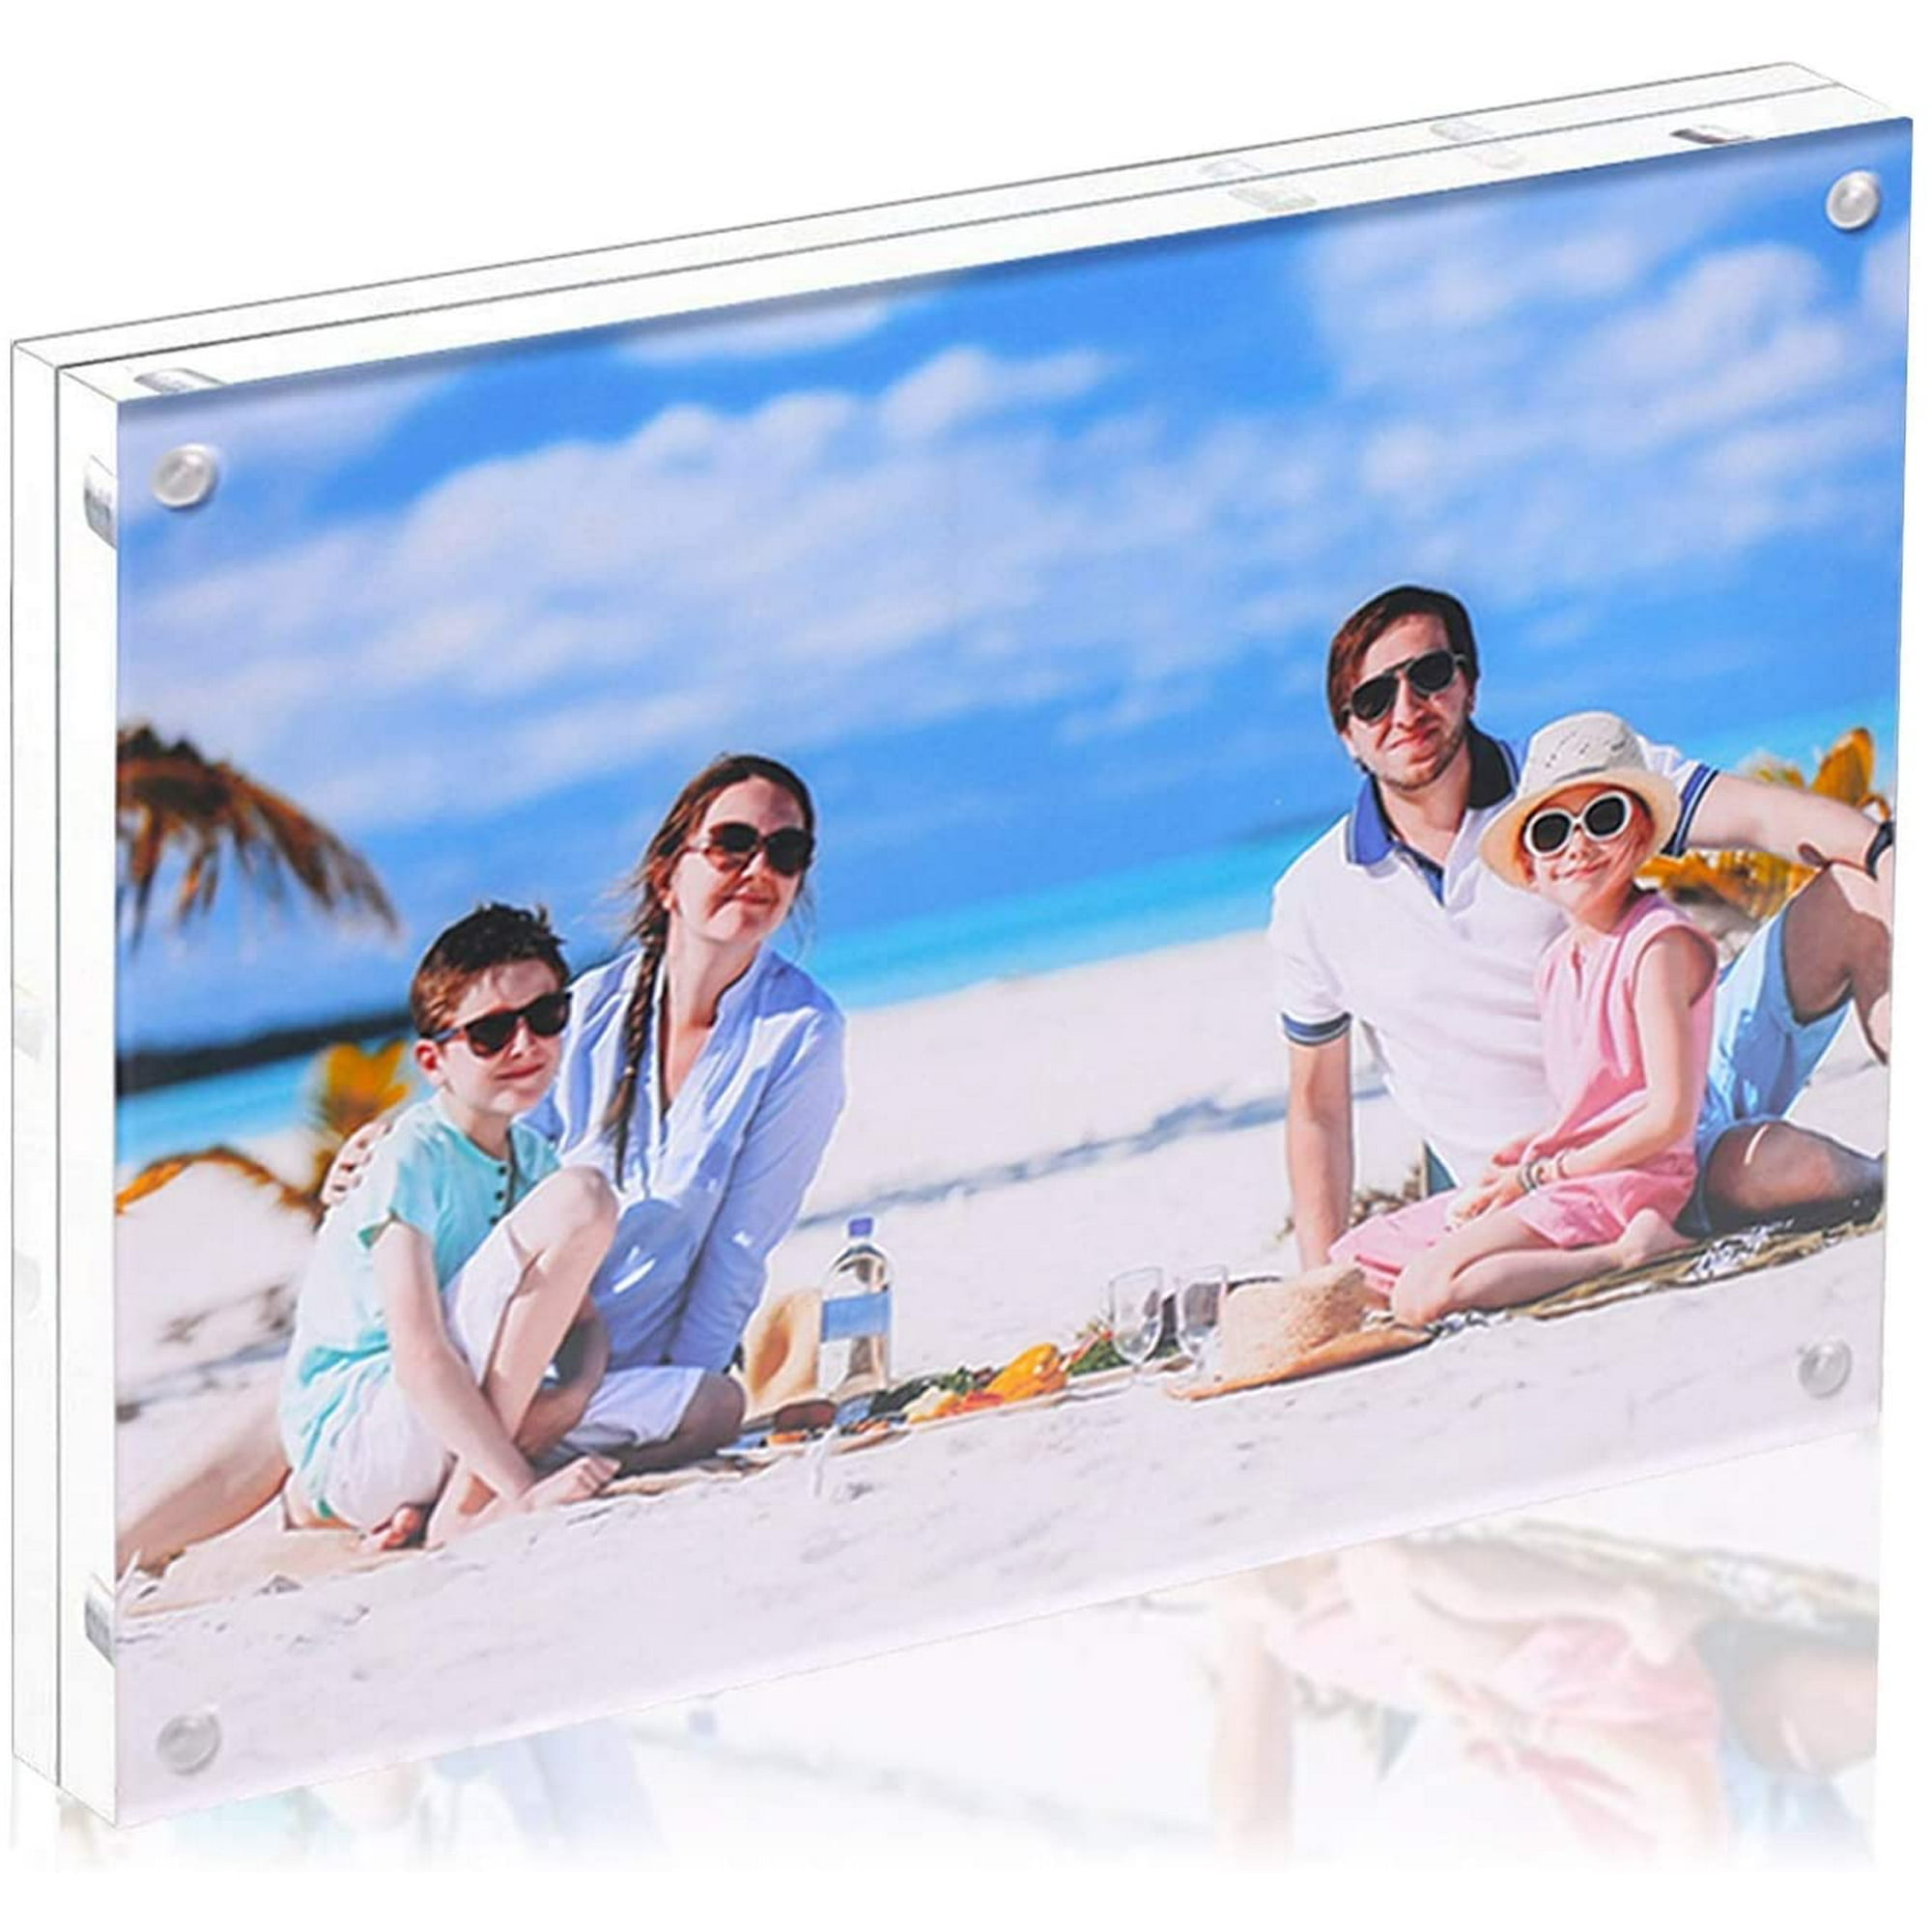 Gallery Wall 24x30 Picture Frame Black 24x30 Frame 24 x 30 Poster Frames 24  x 30